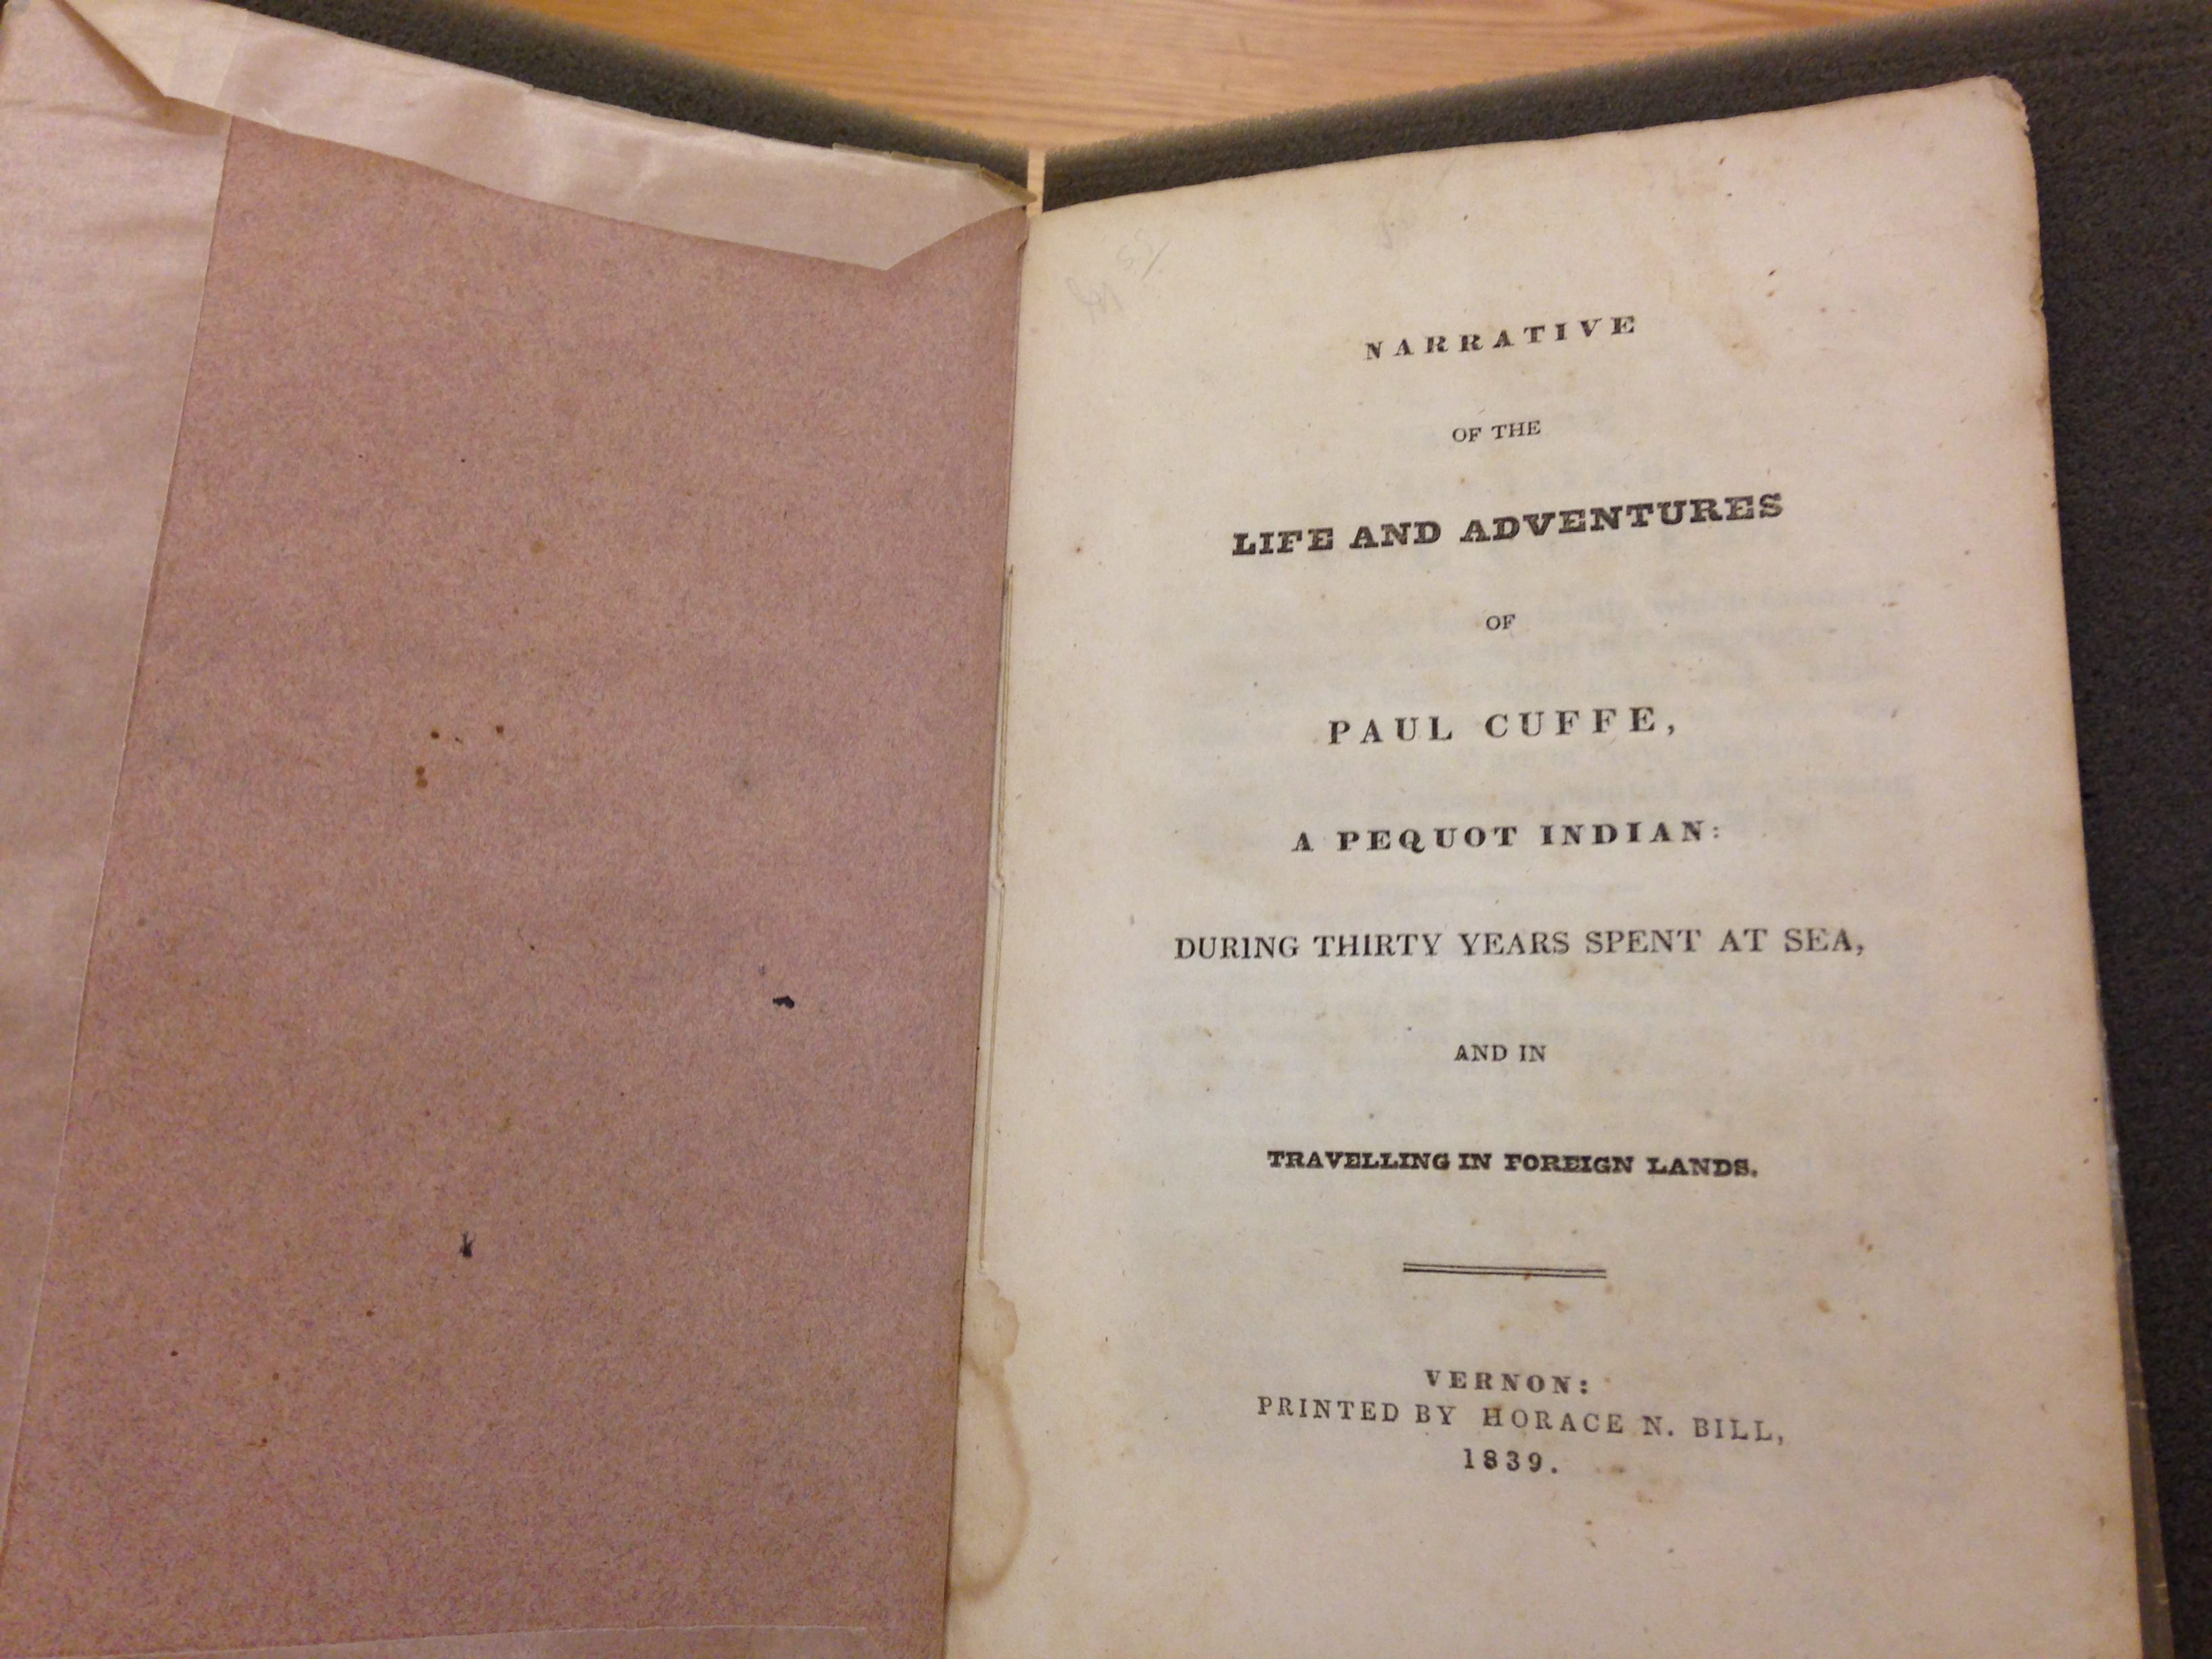 An image of the 1839 narrative from the son of Paul Cuffe (who was also Paul Cuffe). This image was taken at Amherst College's Archives and Special Collections.